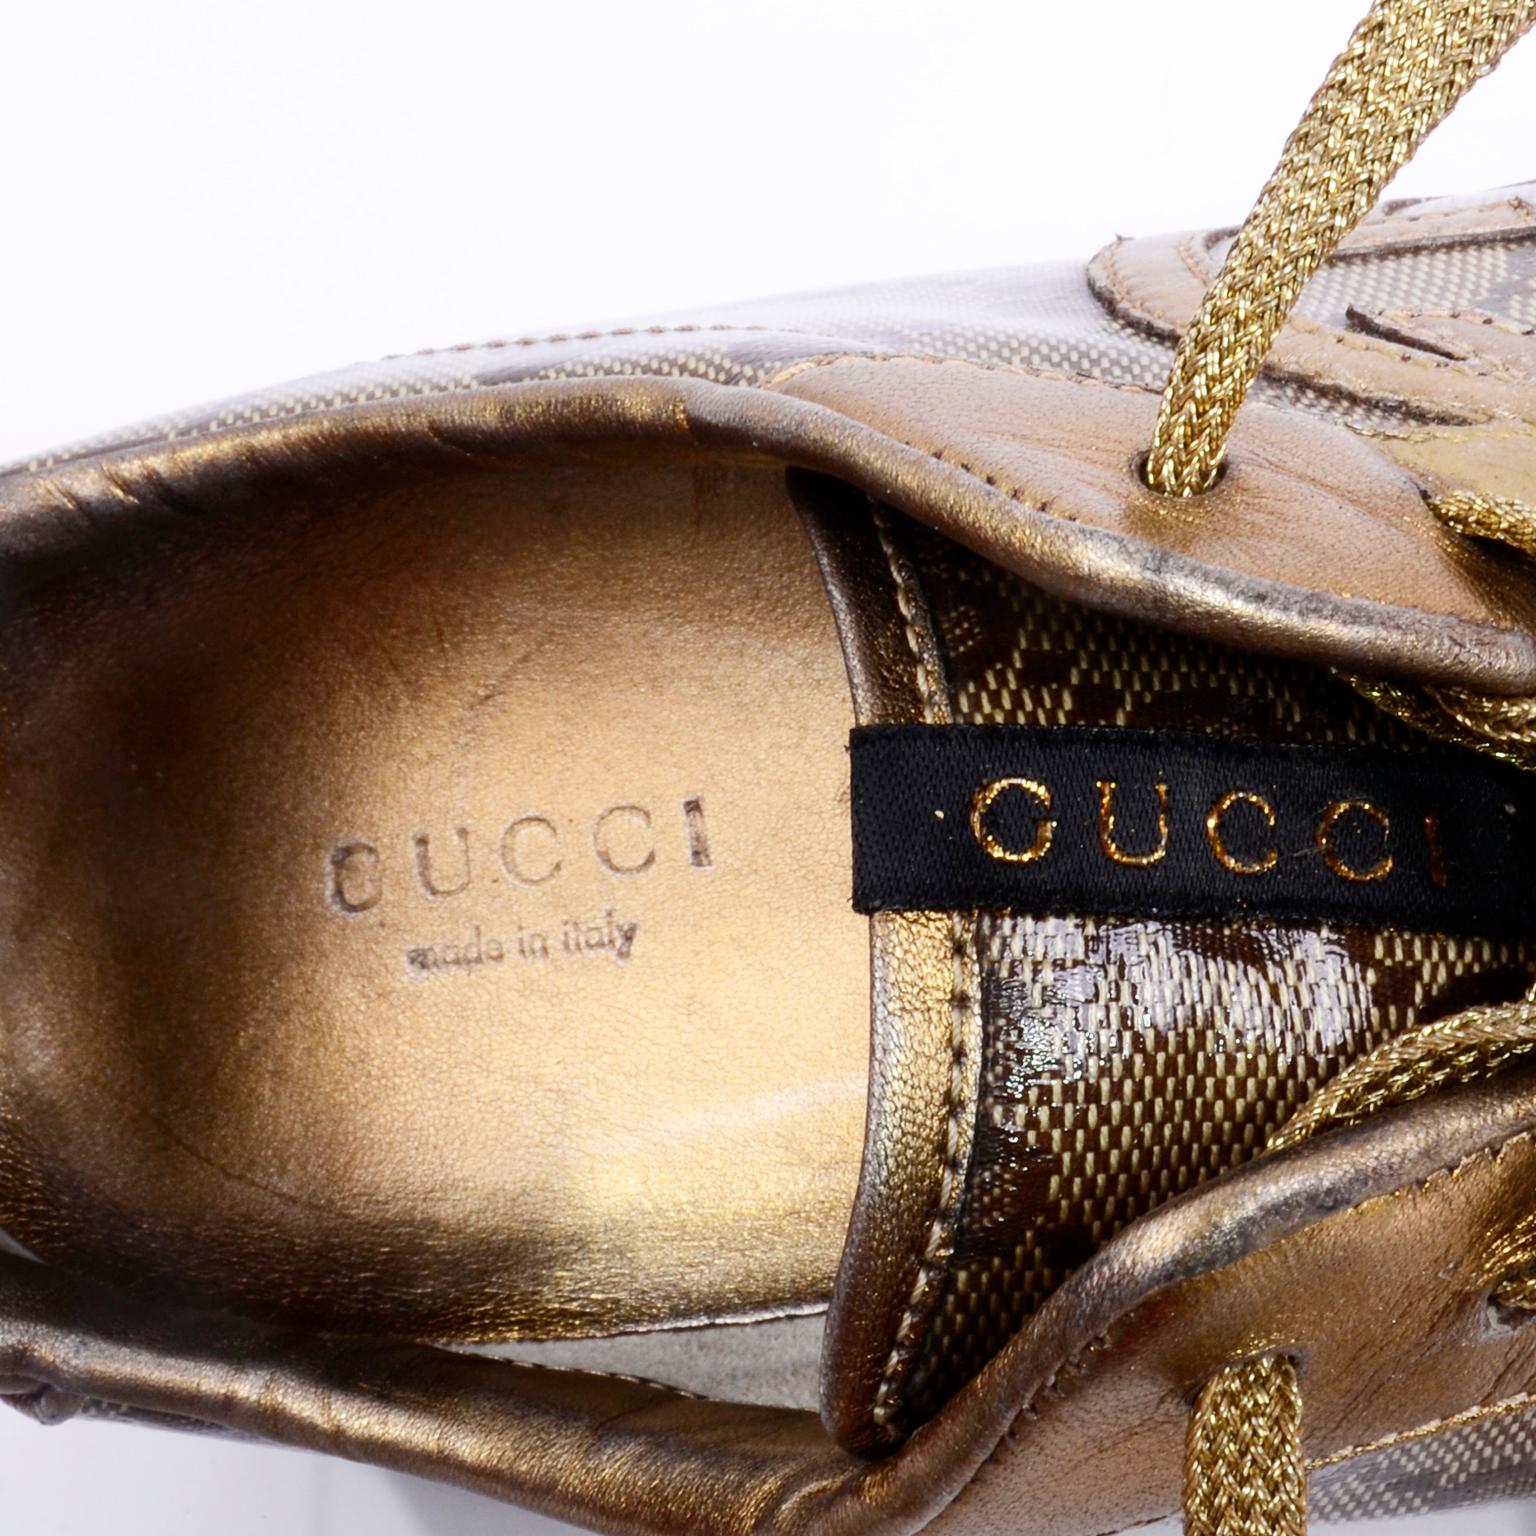 Gucci Monogram Logo Gold Sneakers Canvas & Leather Trainers w Box & Dust Bag 5